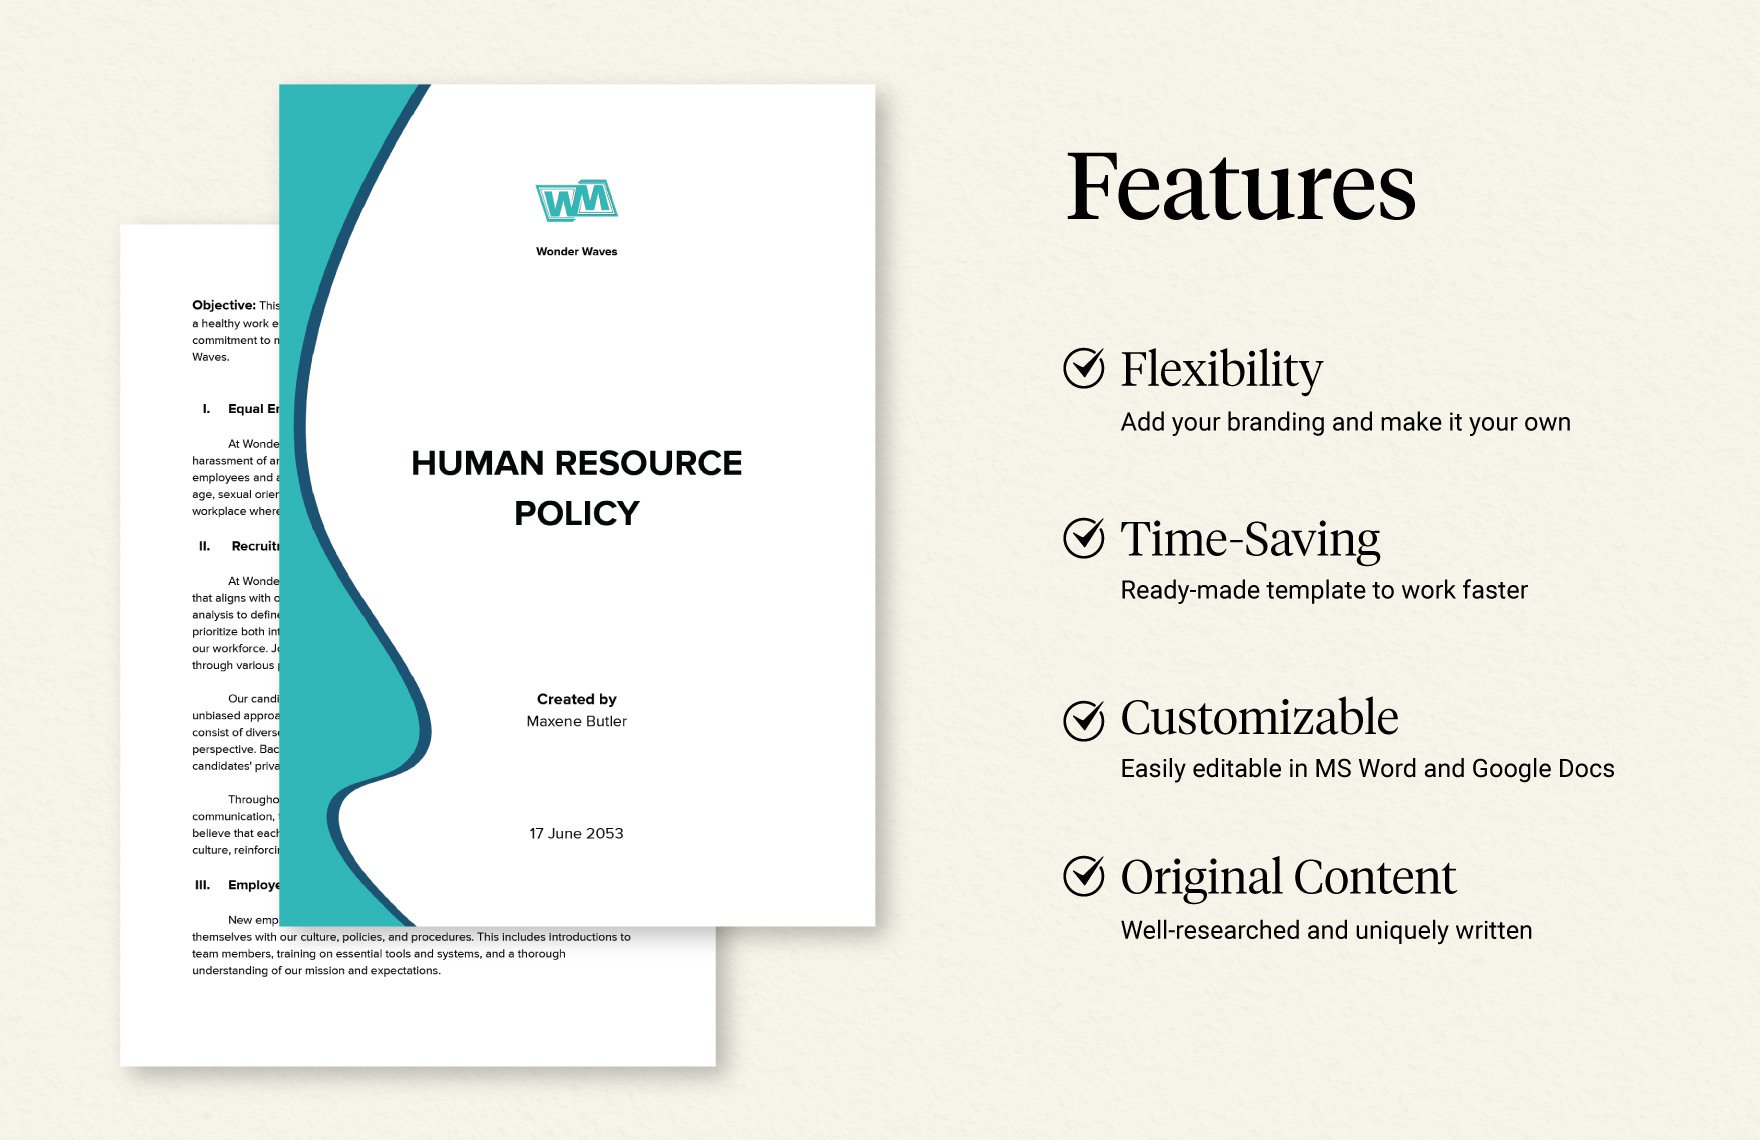 Human Resource Policy Template